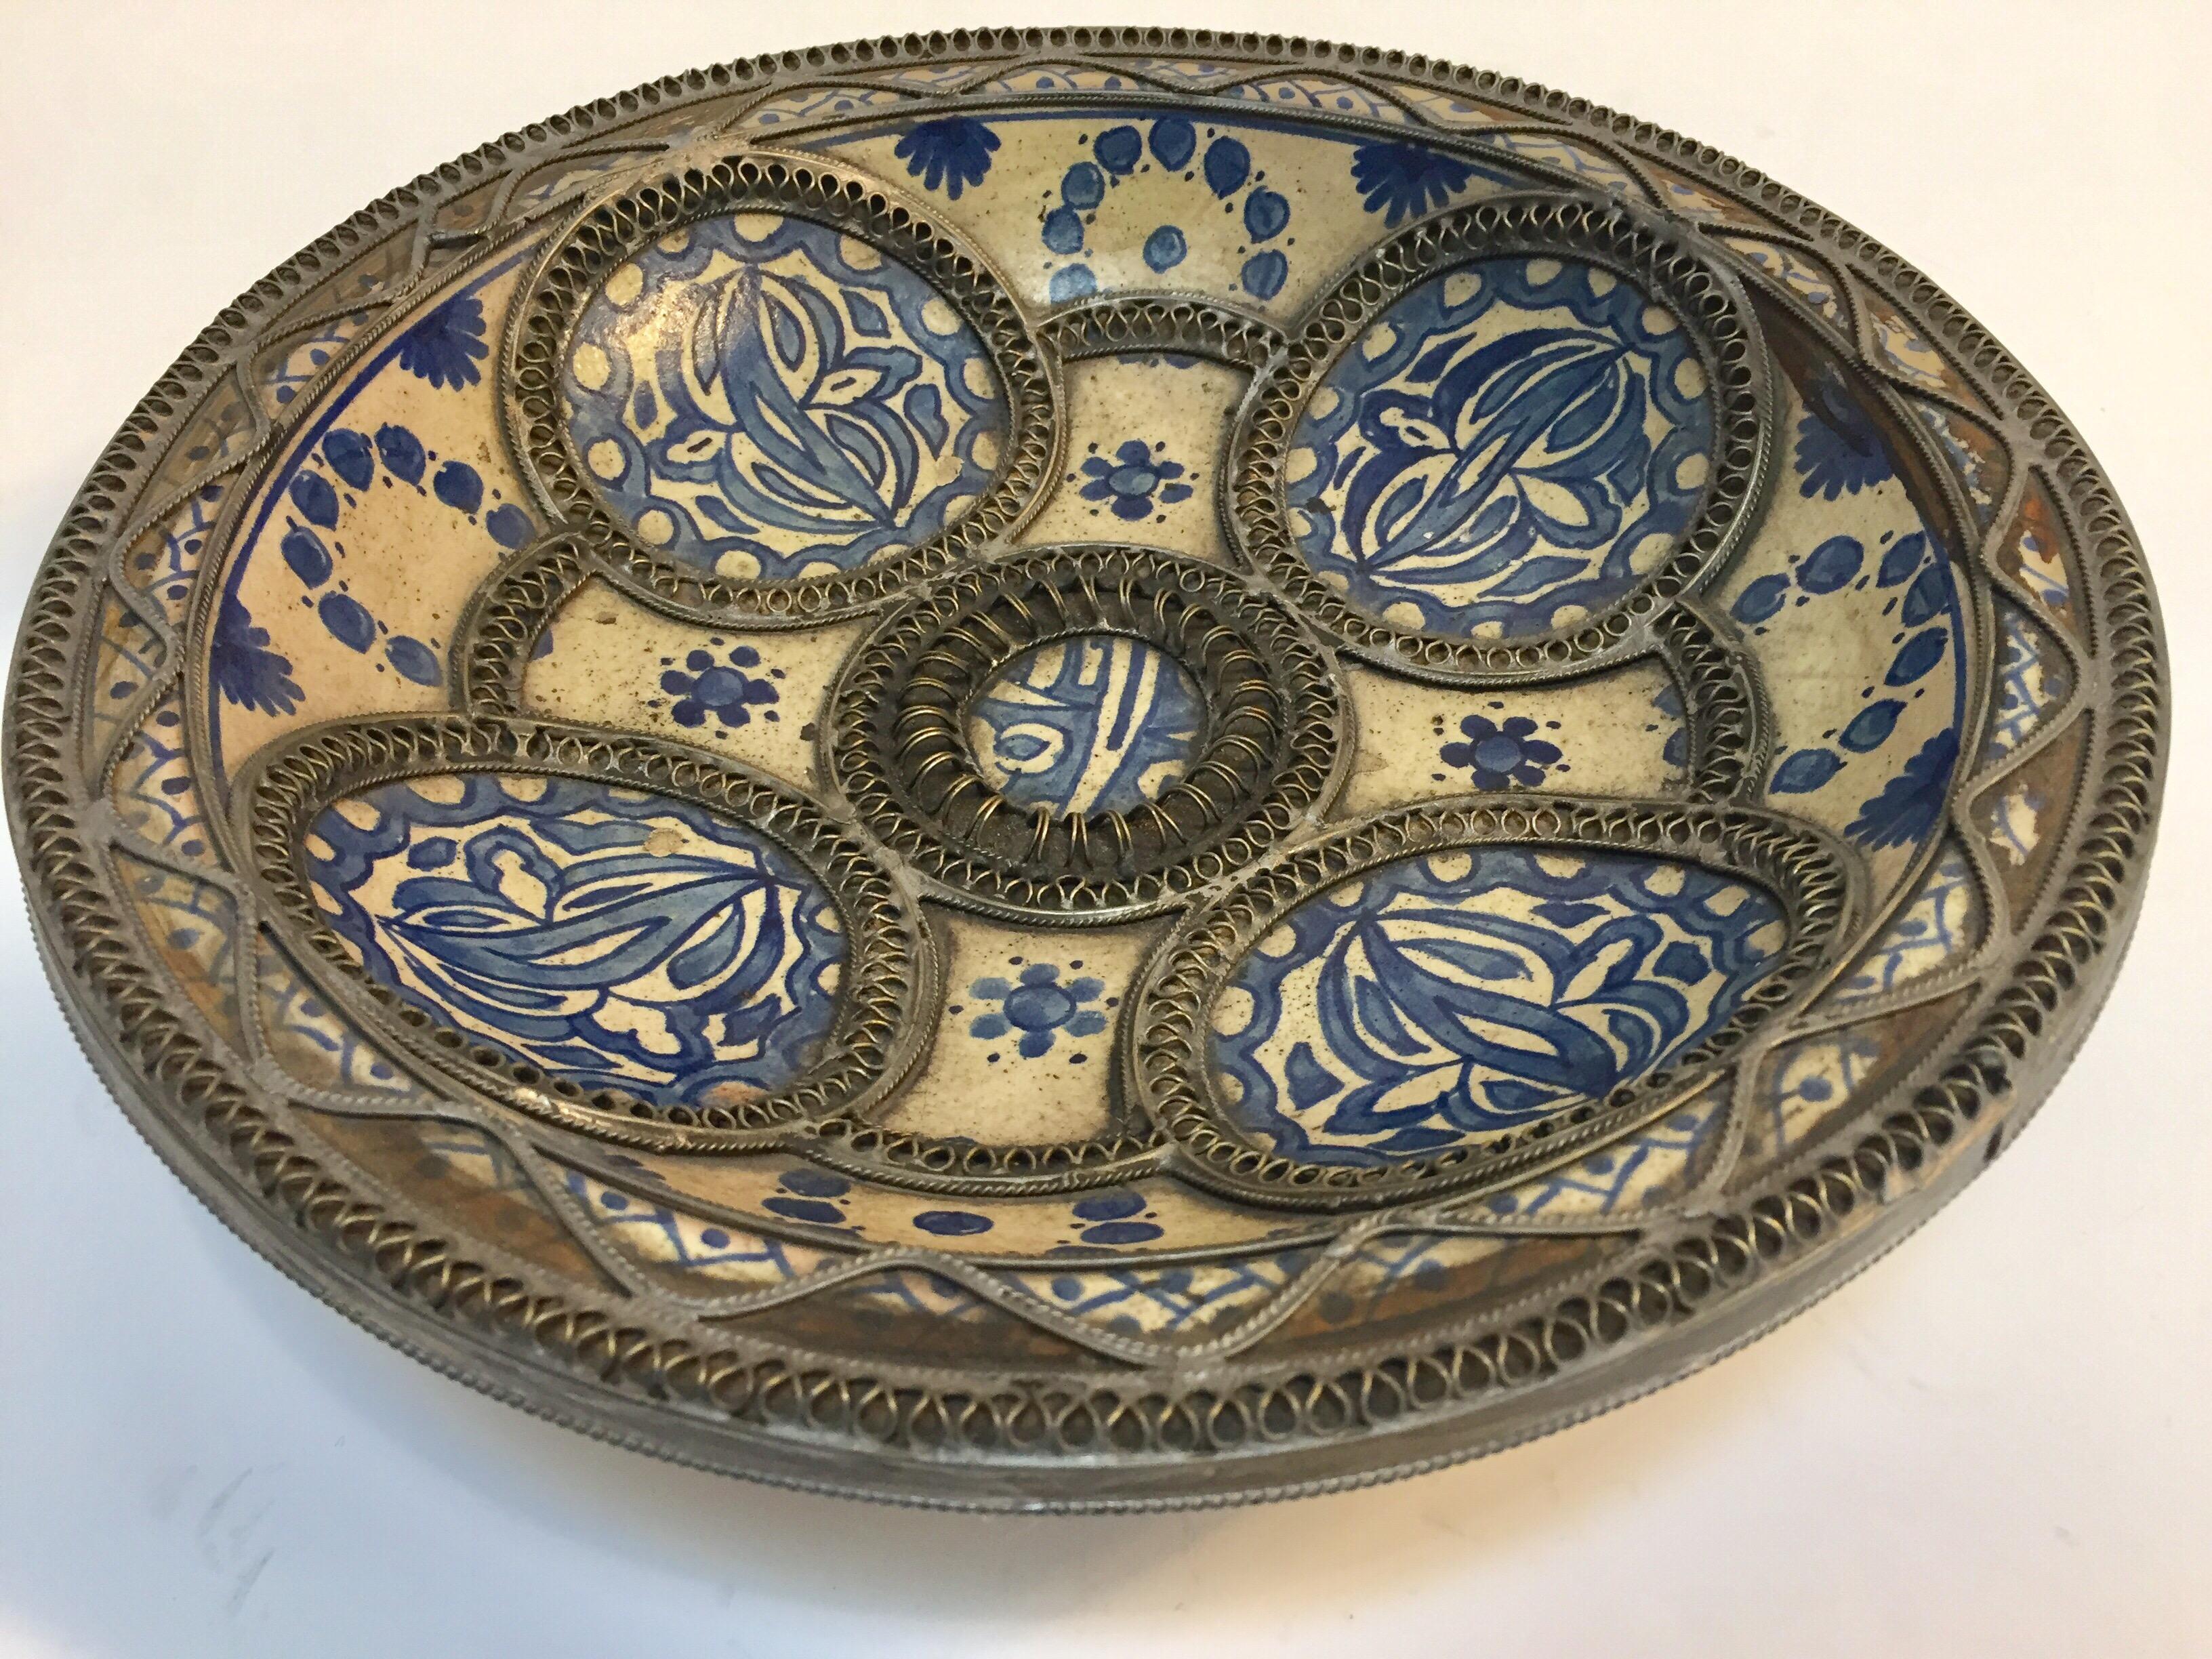 Decorative Moroccan Blue and White Handcrafted Ceramic Bowl from Fez 1